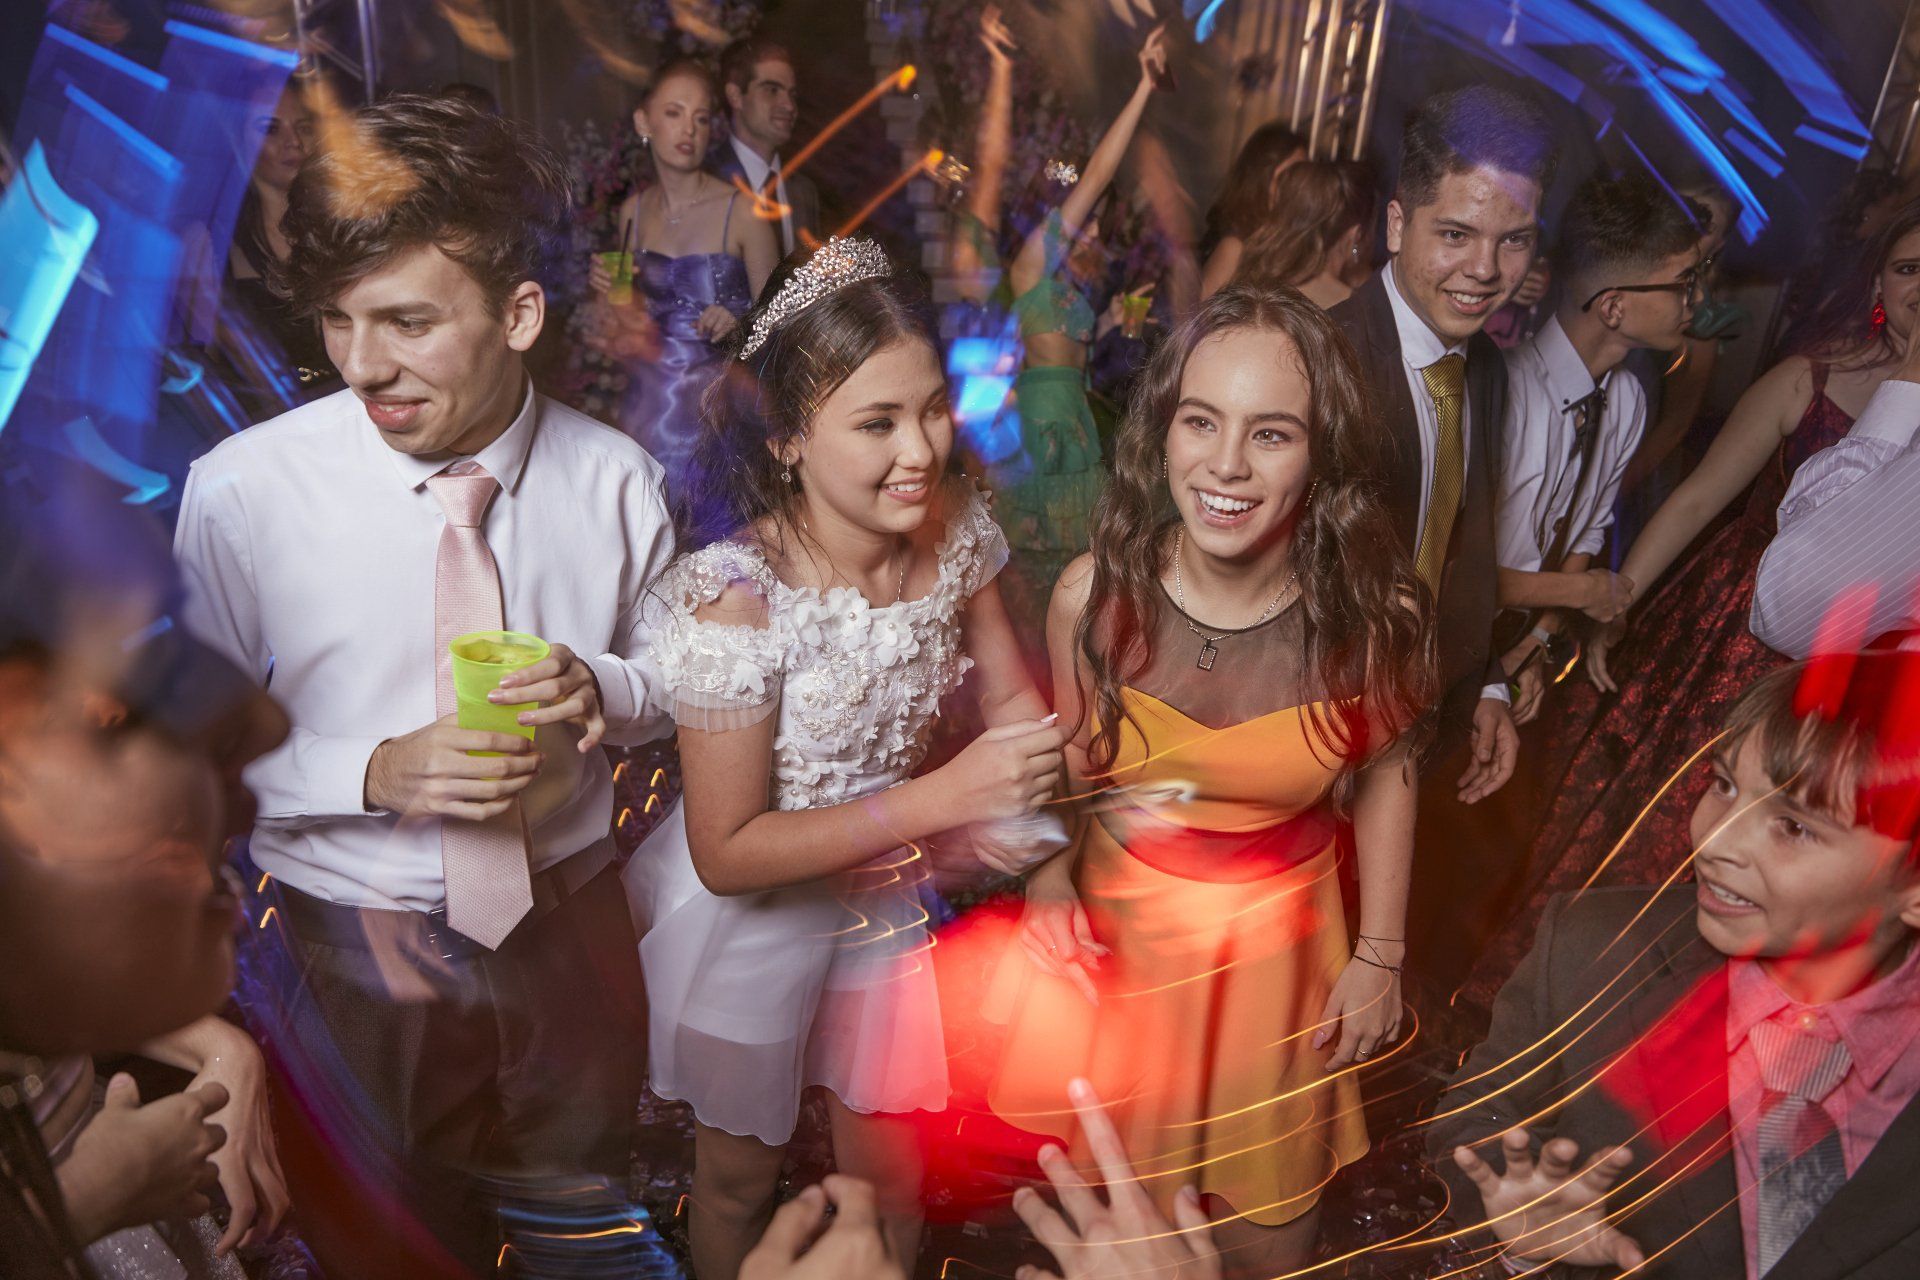 Unforgettable San Jose Prom with Flash Party Photo Booth snaps!